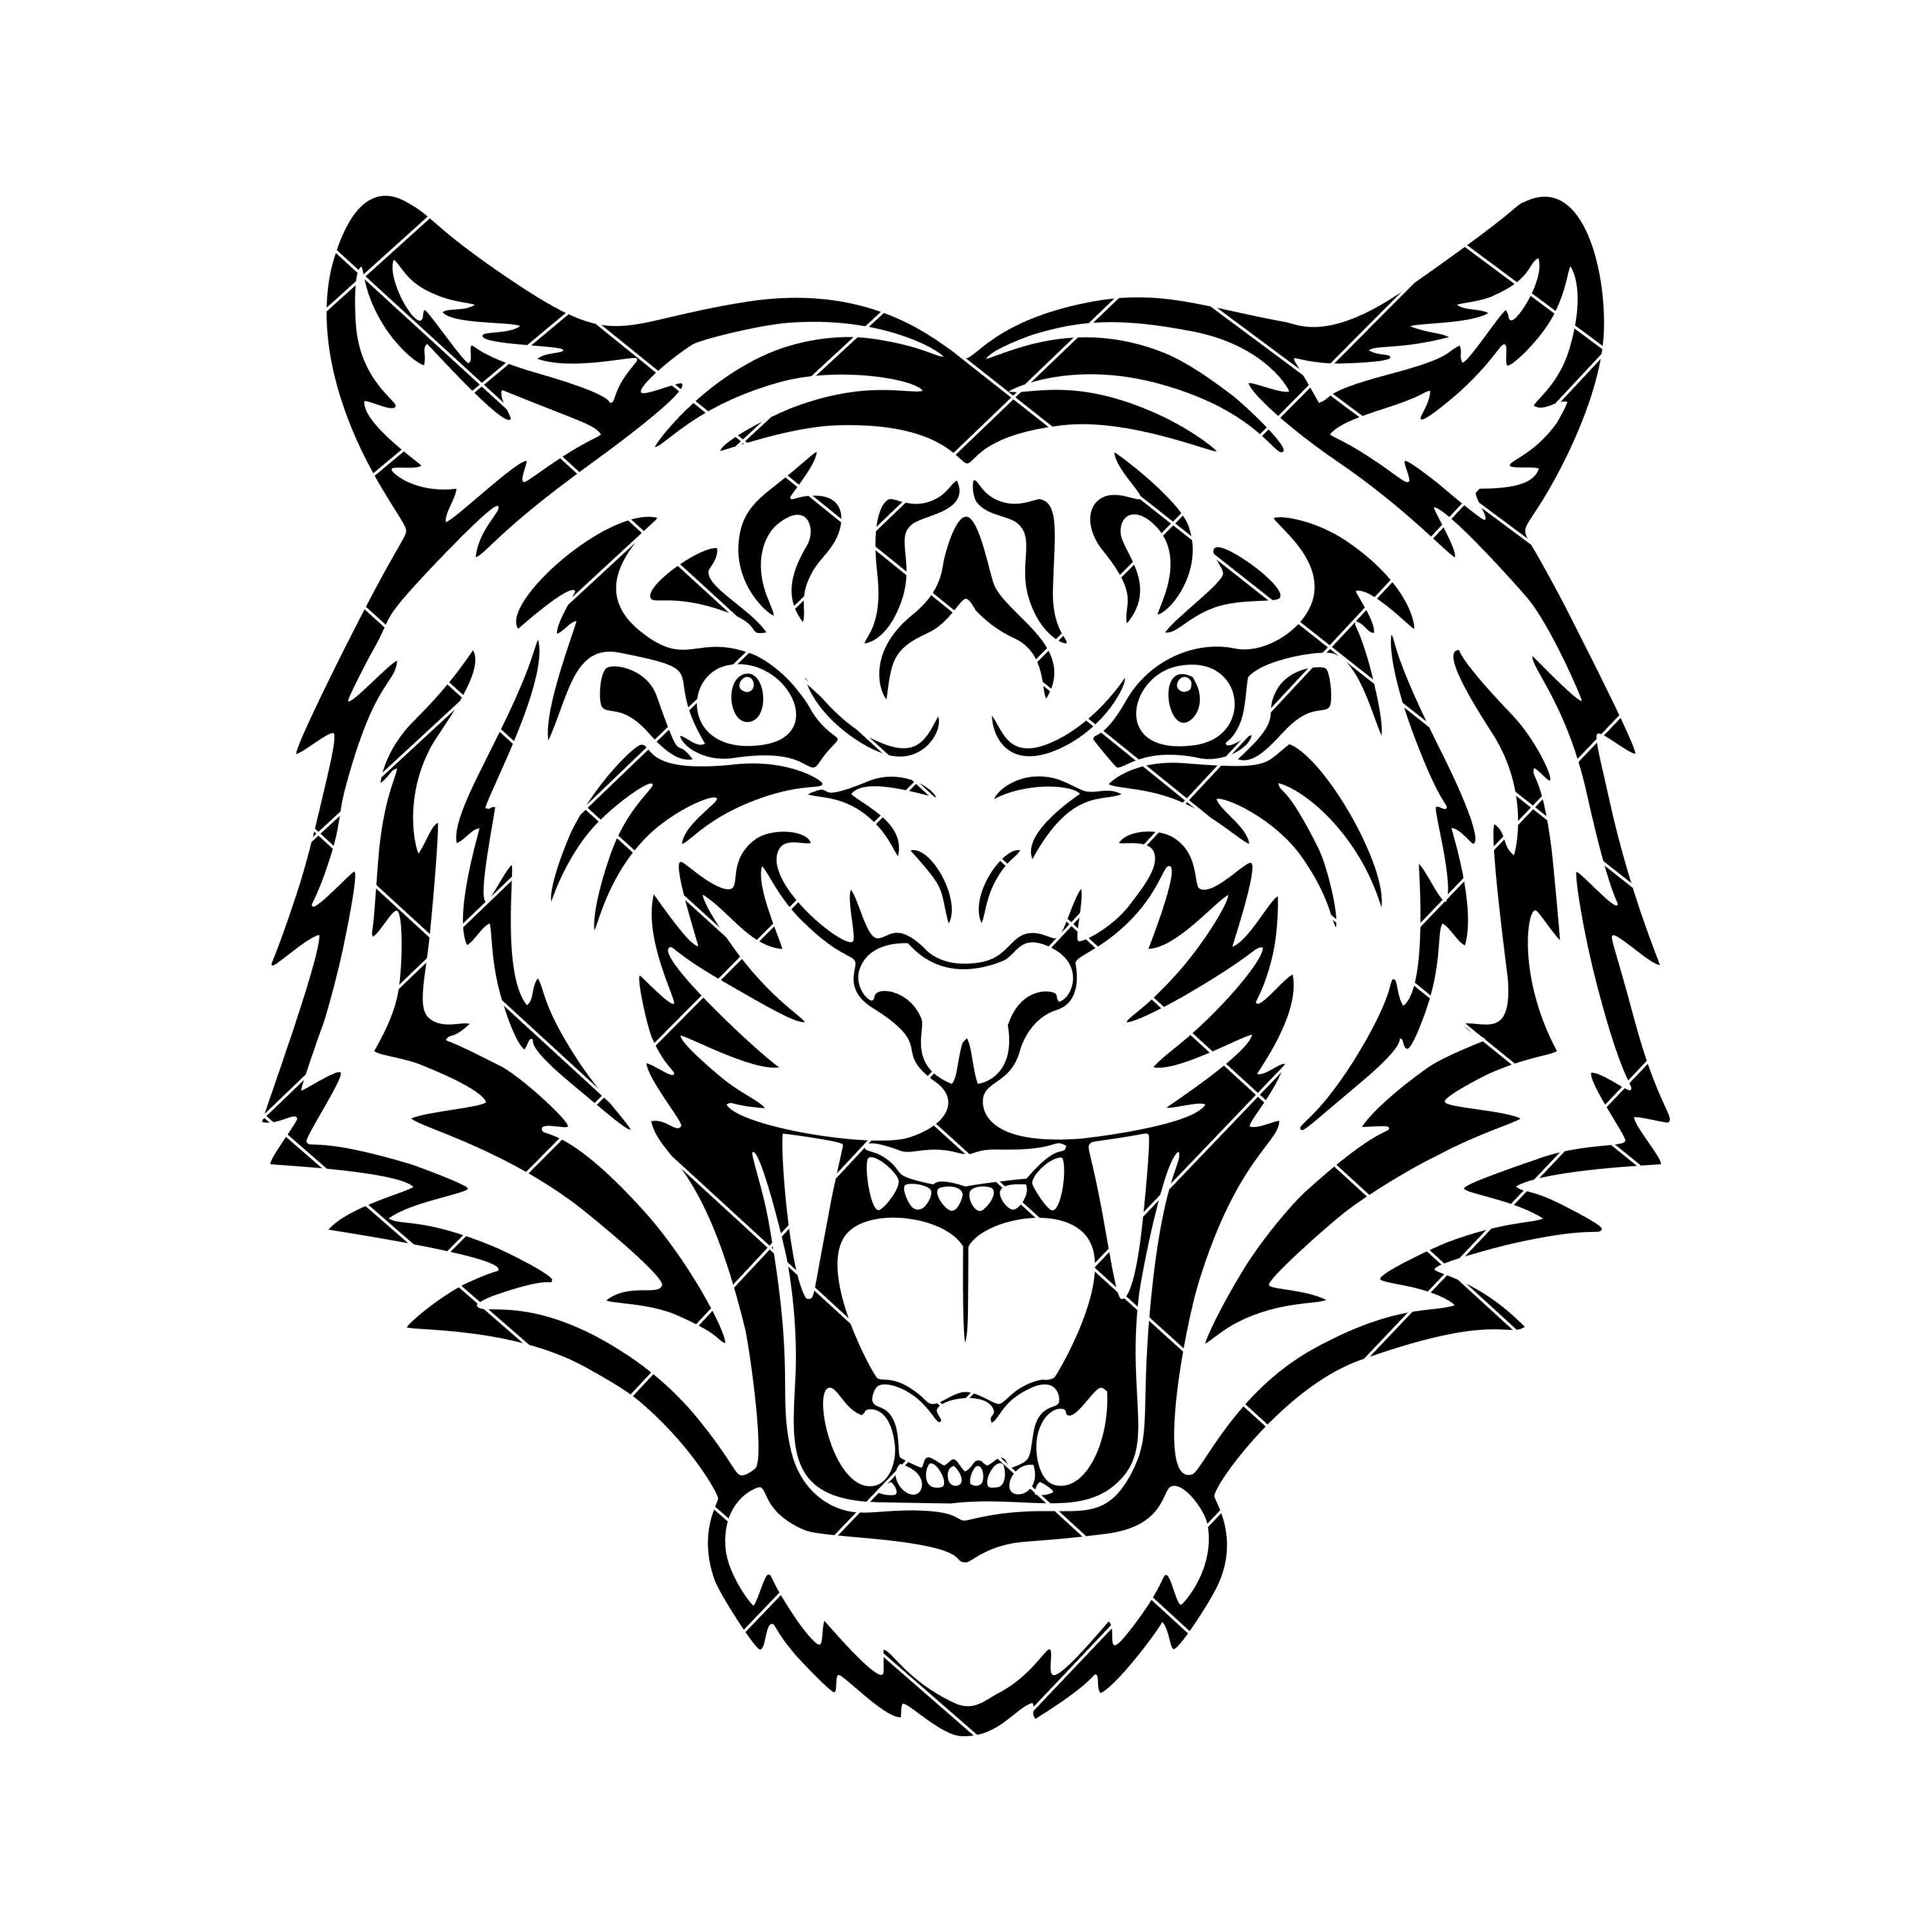 Angry Tiger Face Roaring Black White Outline Clipart Clip Art | Etsy